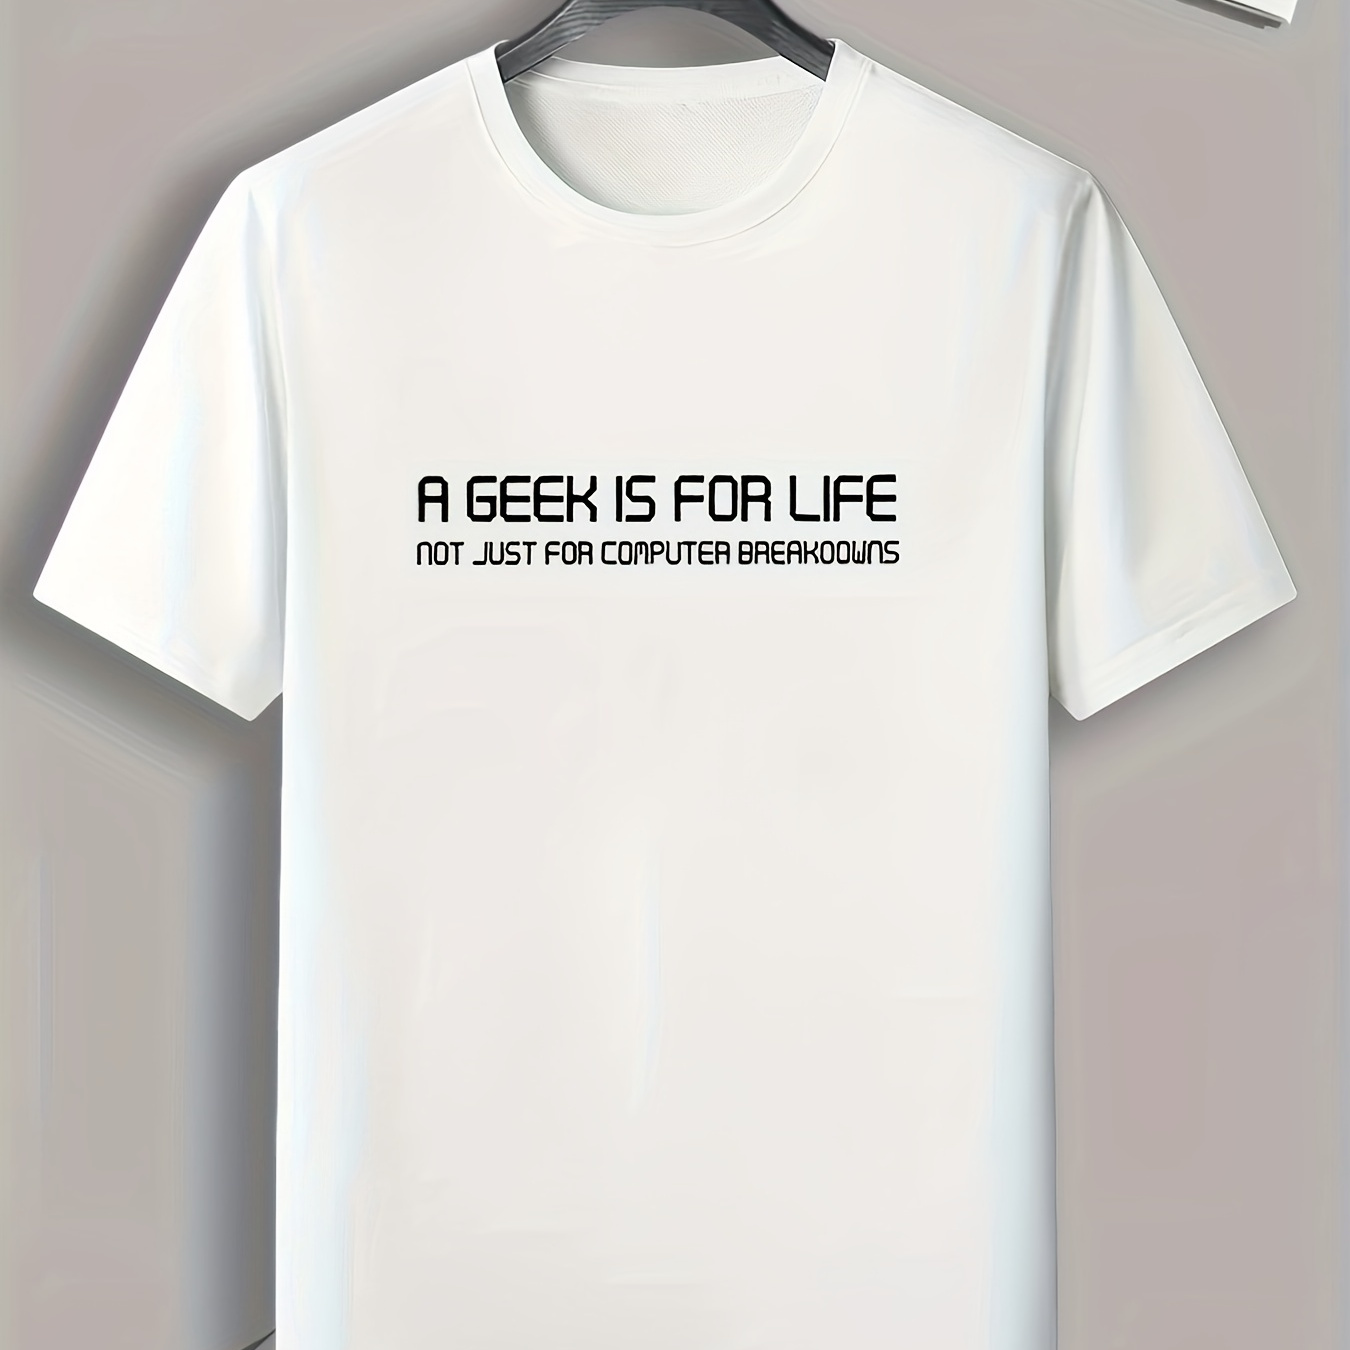 

A Geek Is For Life, Men's Letter Print T-shirt, Active Comfy Slightly Stretch Crew Neck Tee, Men's Clothing For Outdoor